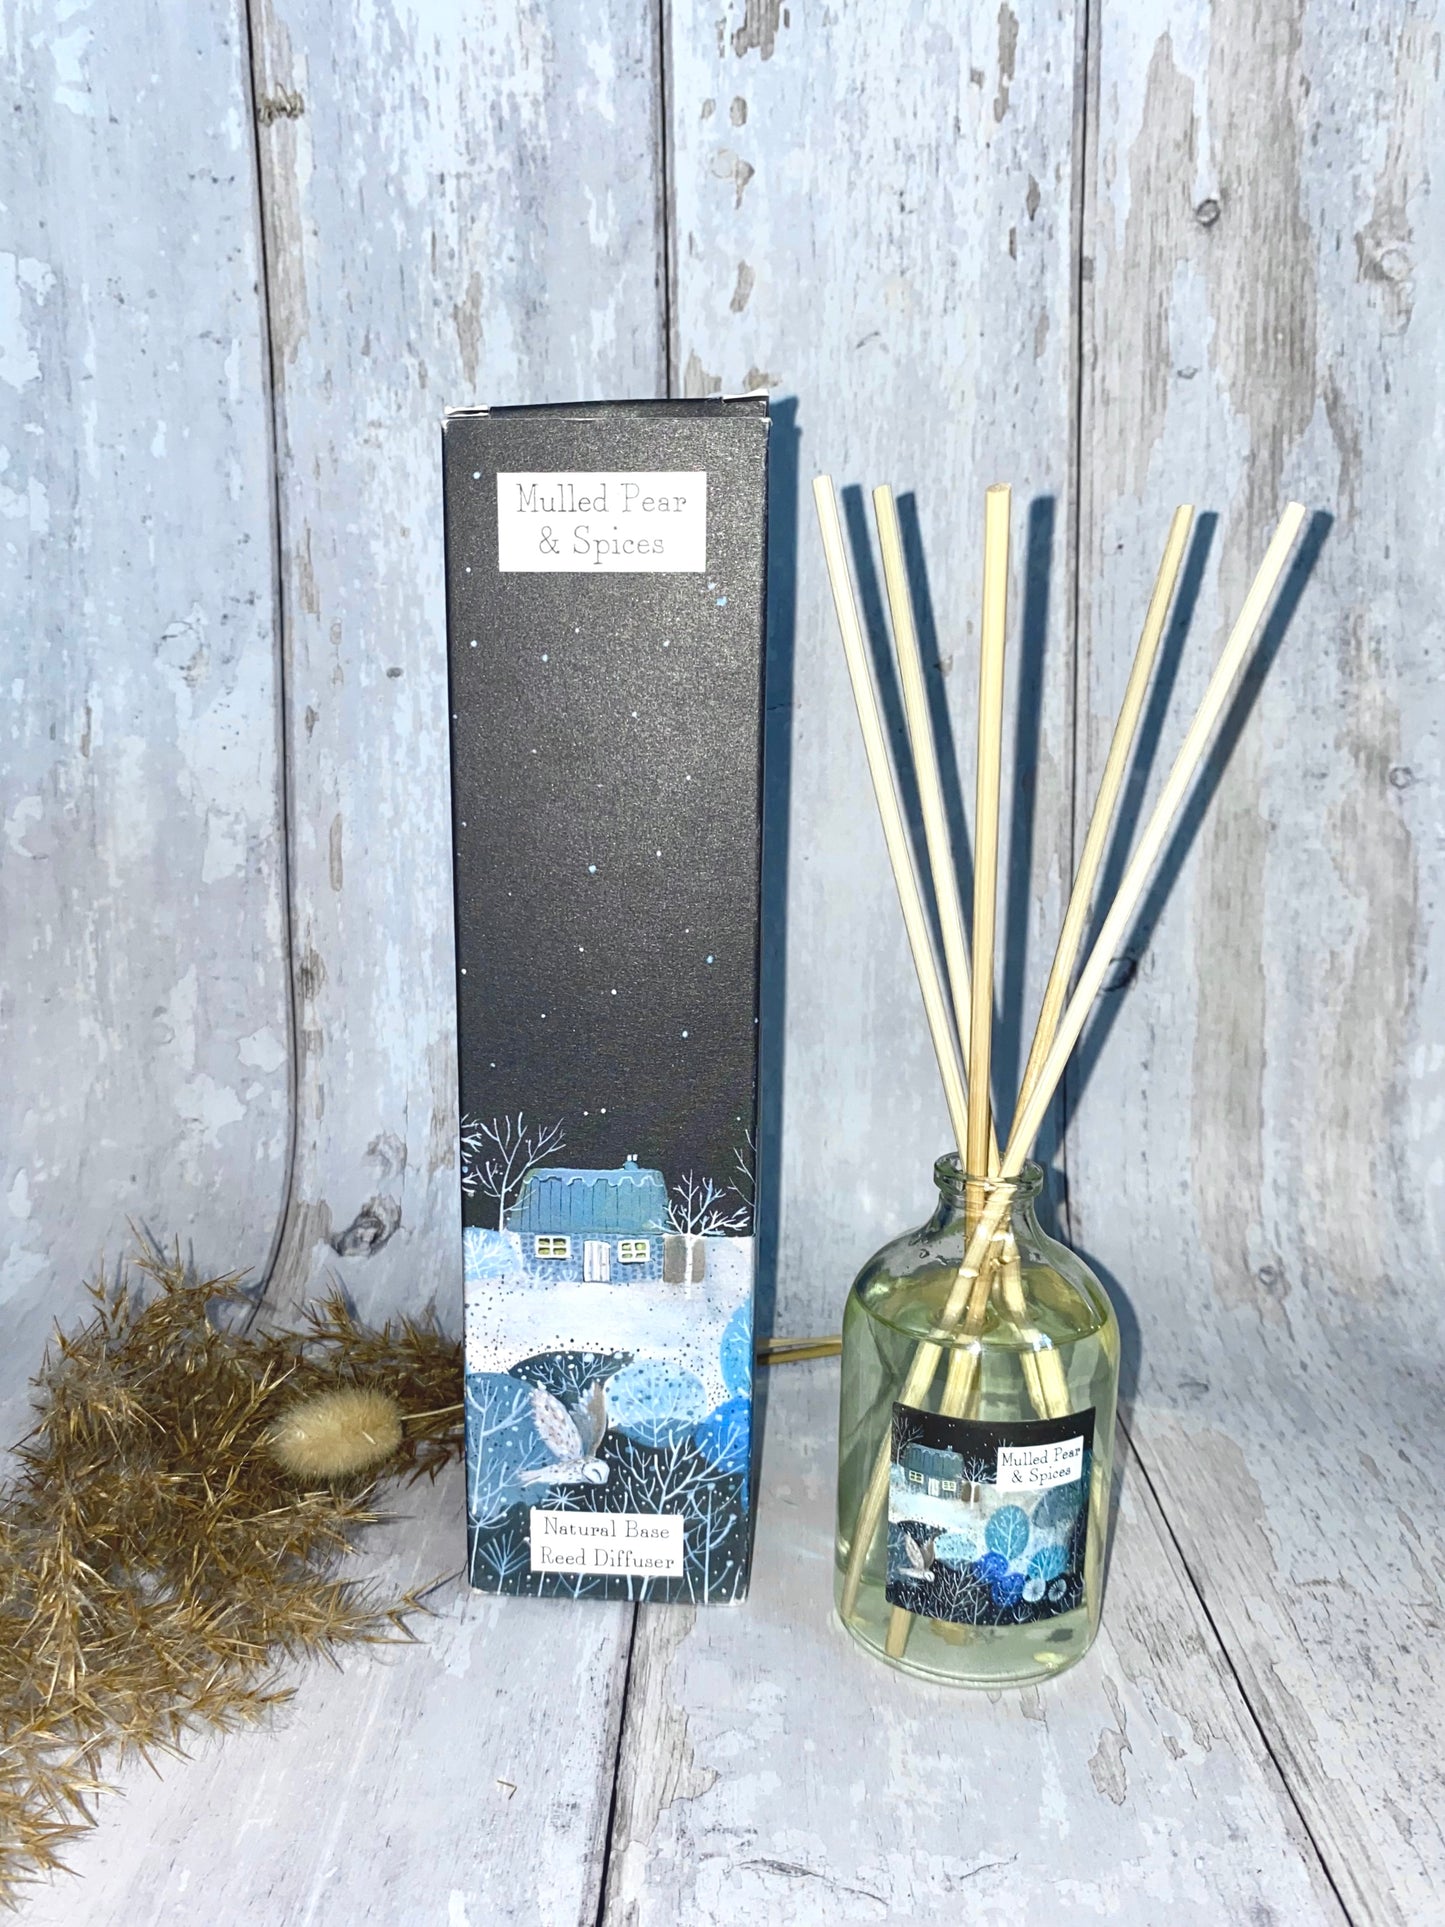 Reed Diffuser: Mulled Pear & Spice